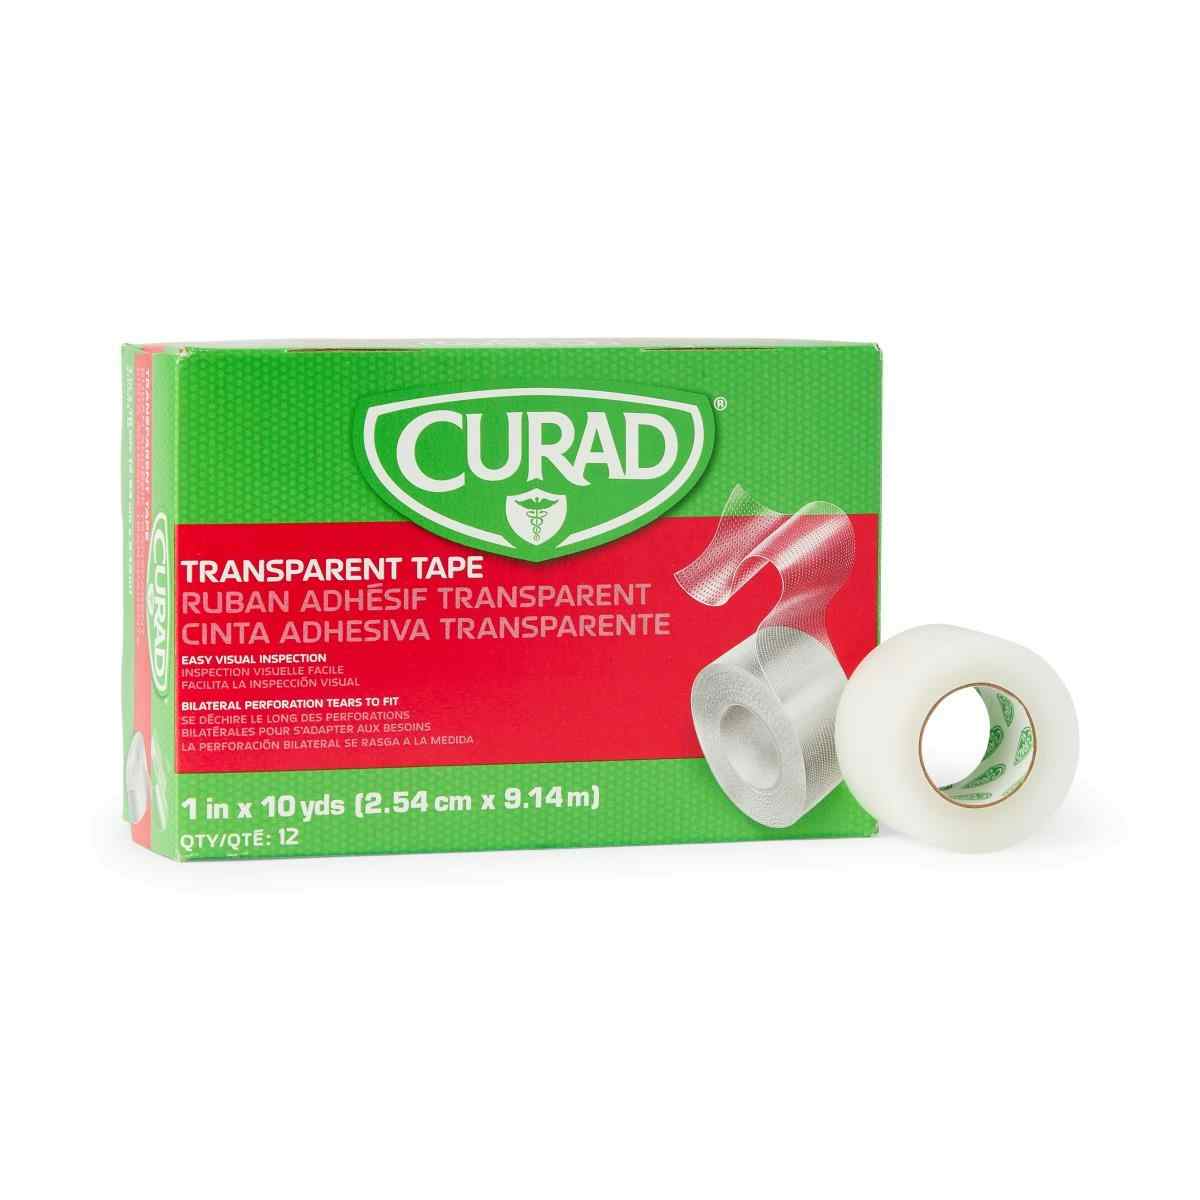 CURAD Transparent Adhesive Tape, NON270201Z, 1" X 10 yd - Box of 12